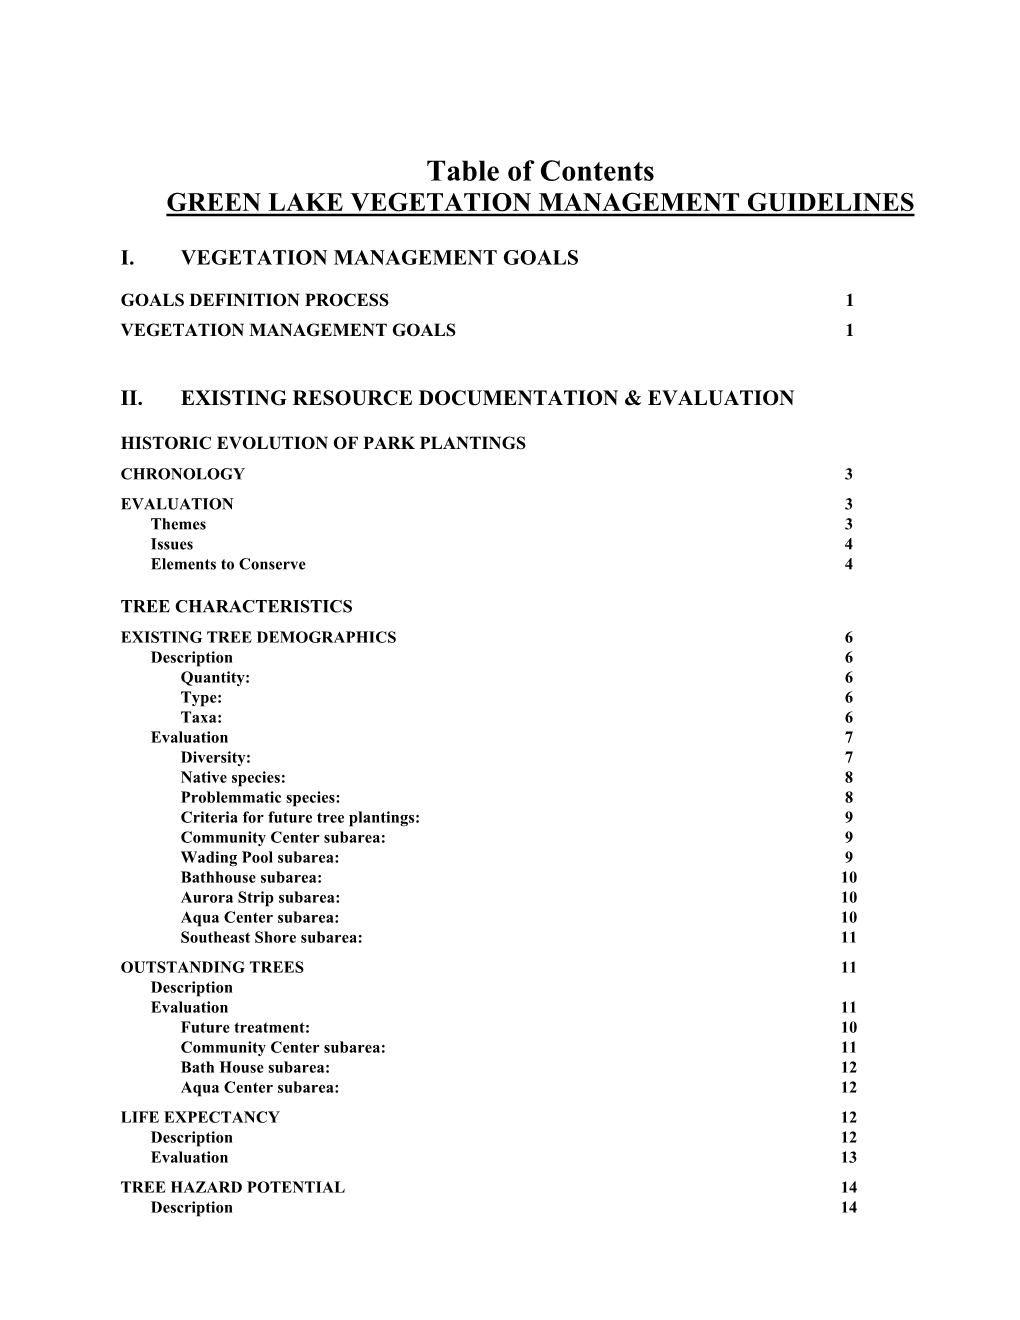 Table of Contents GREEN LAKE VEGETATION MANAGEMENT GUIDELINES